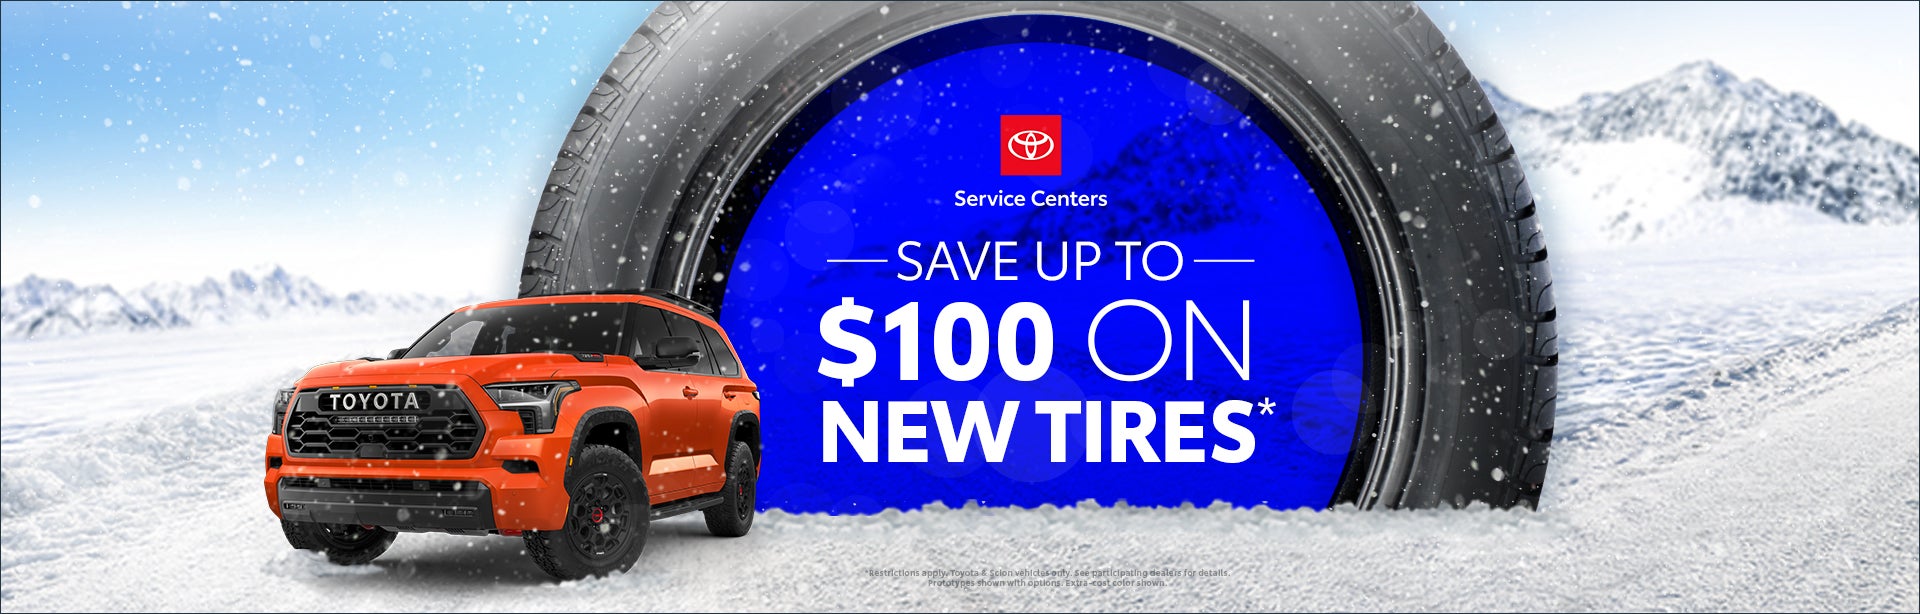 Save Up To $100 On New Tires